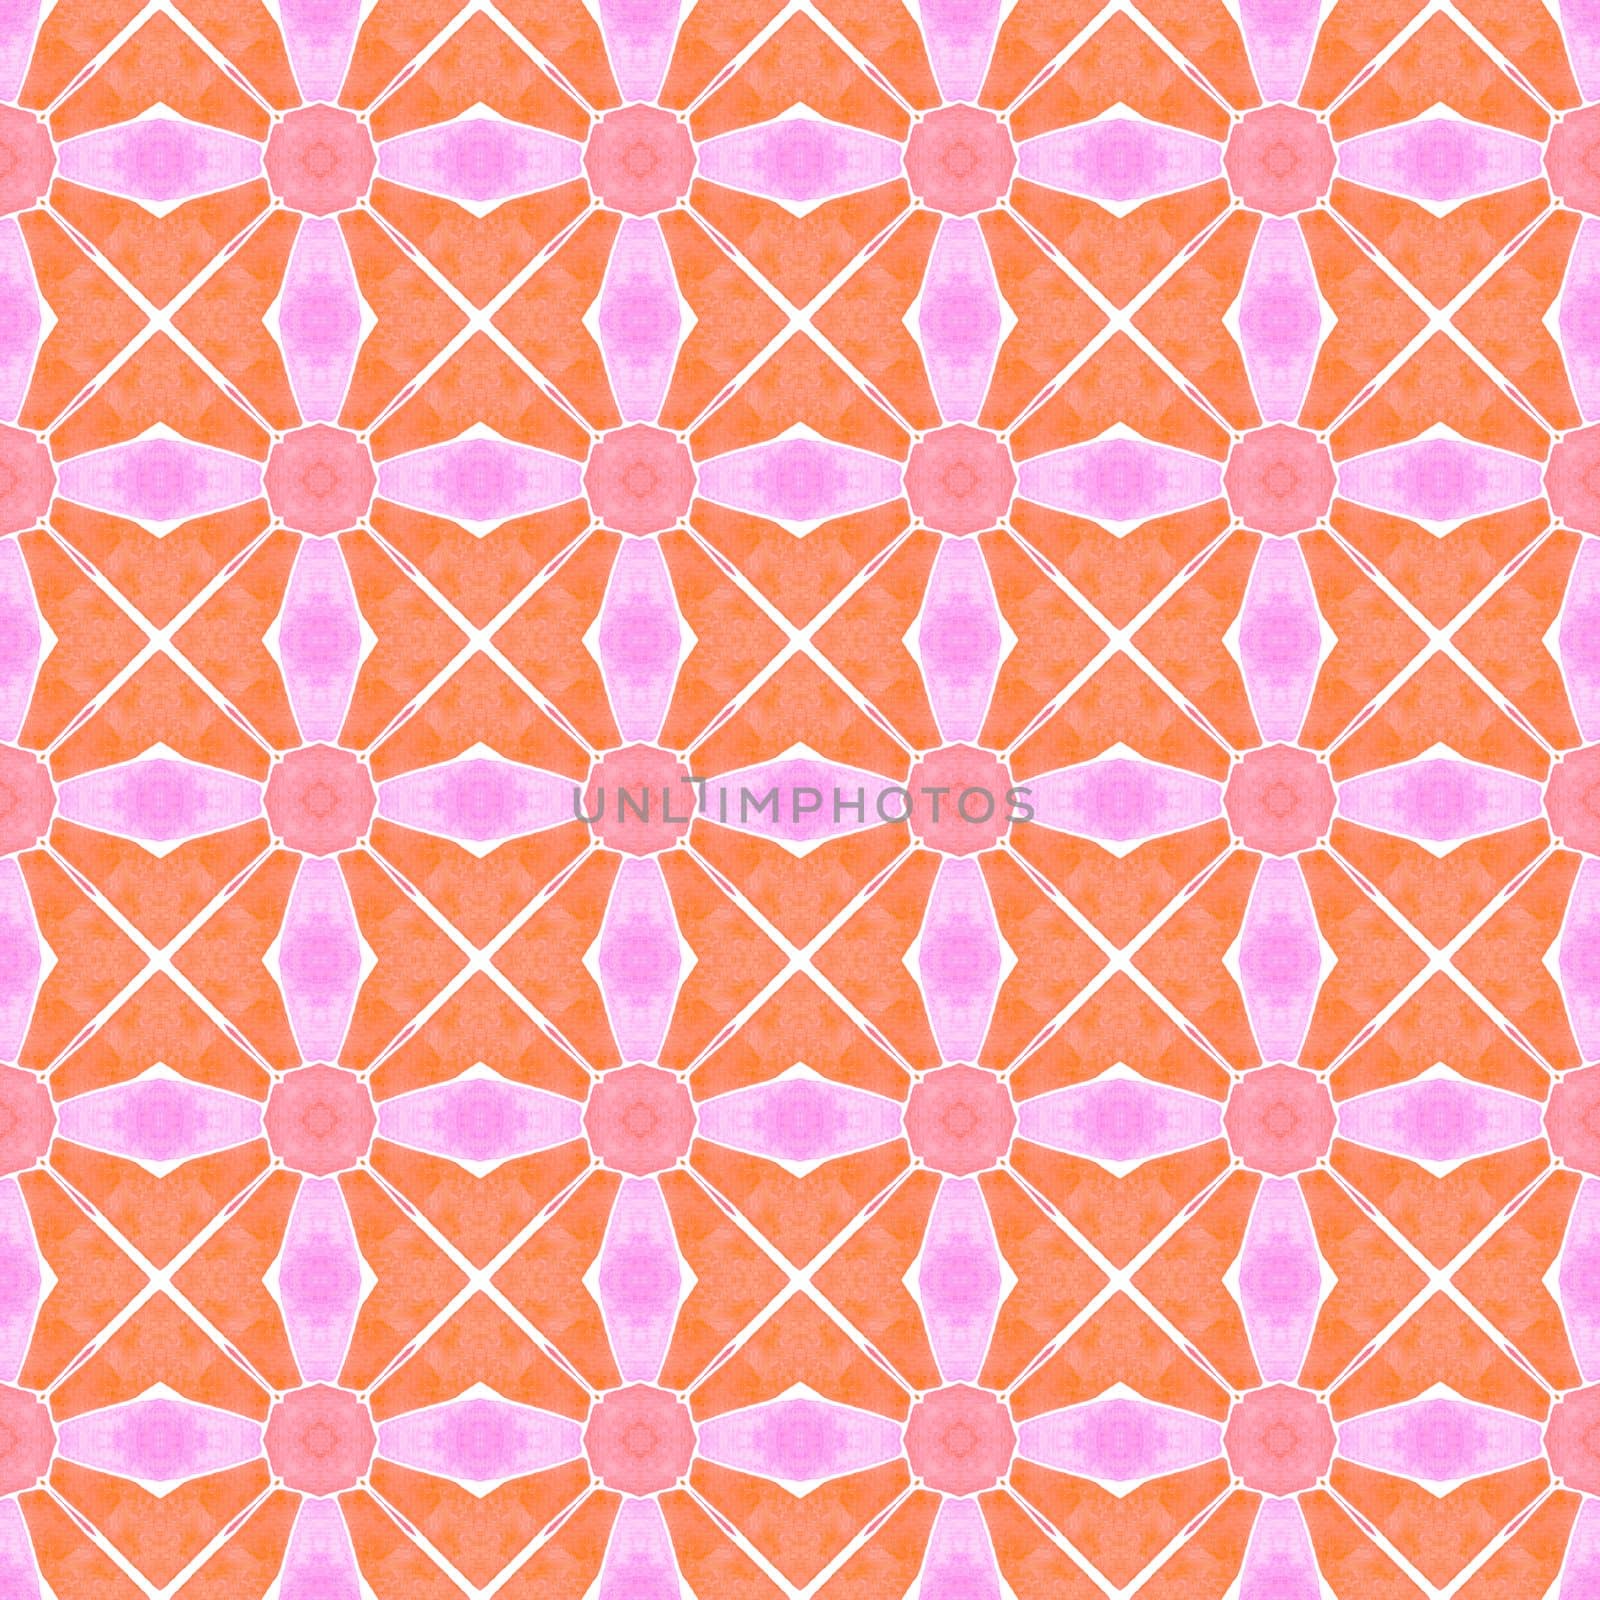 Textile ready divine print, swimwear fabric, wallpaper, wrapping. Orange shapely boho chic summer design. Exotic seamless pattern. Summer exotic seamless border.